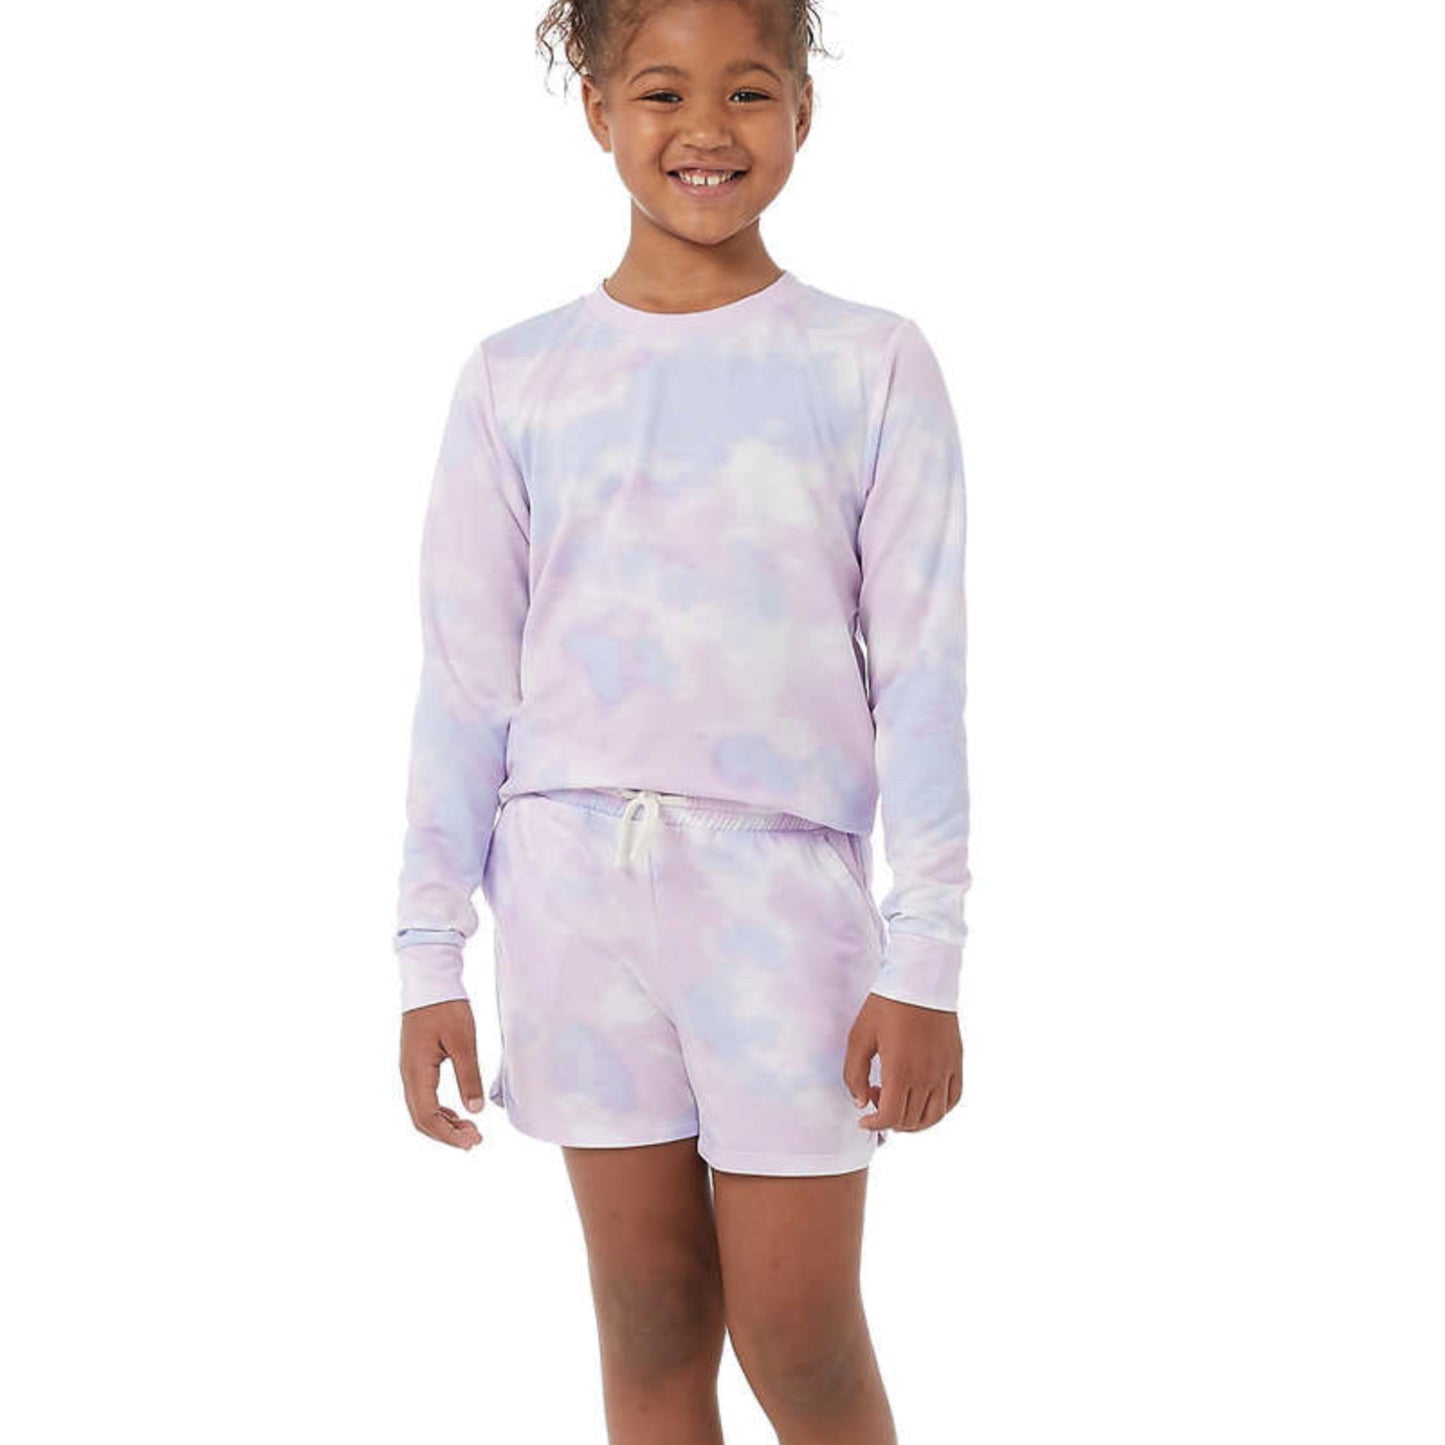 32 Degrees Big Girls Youth 2-piece Long Sleeve Top and Shorts Set